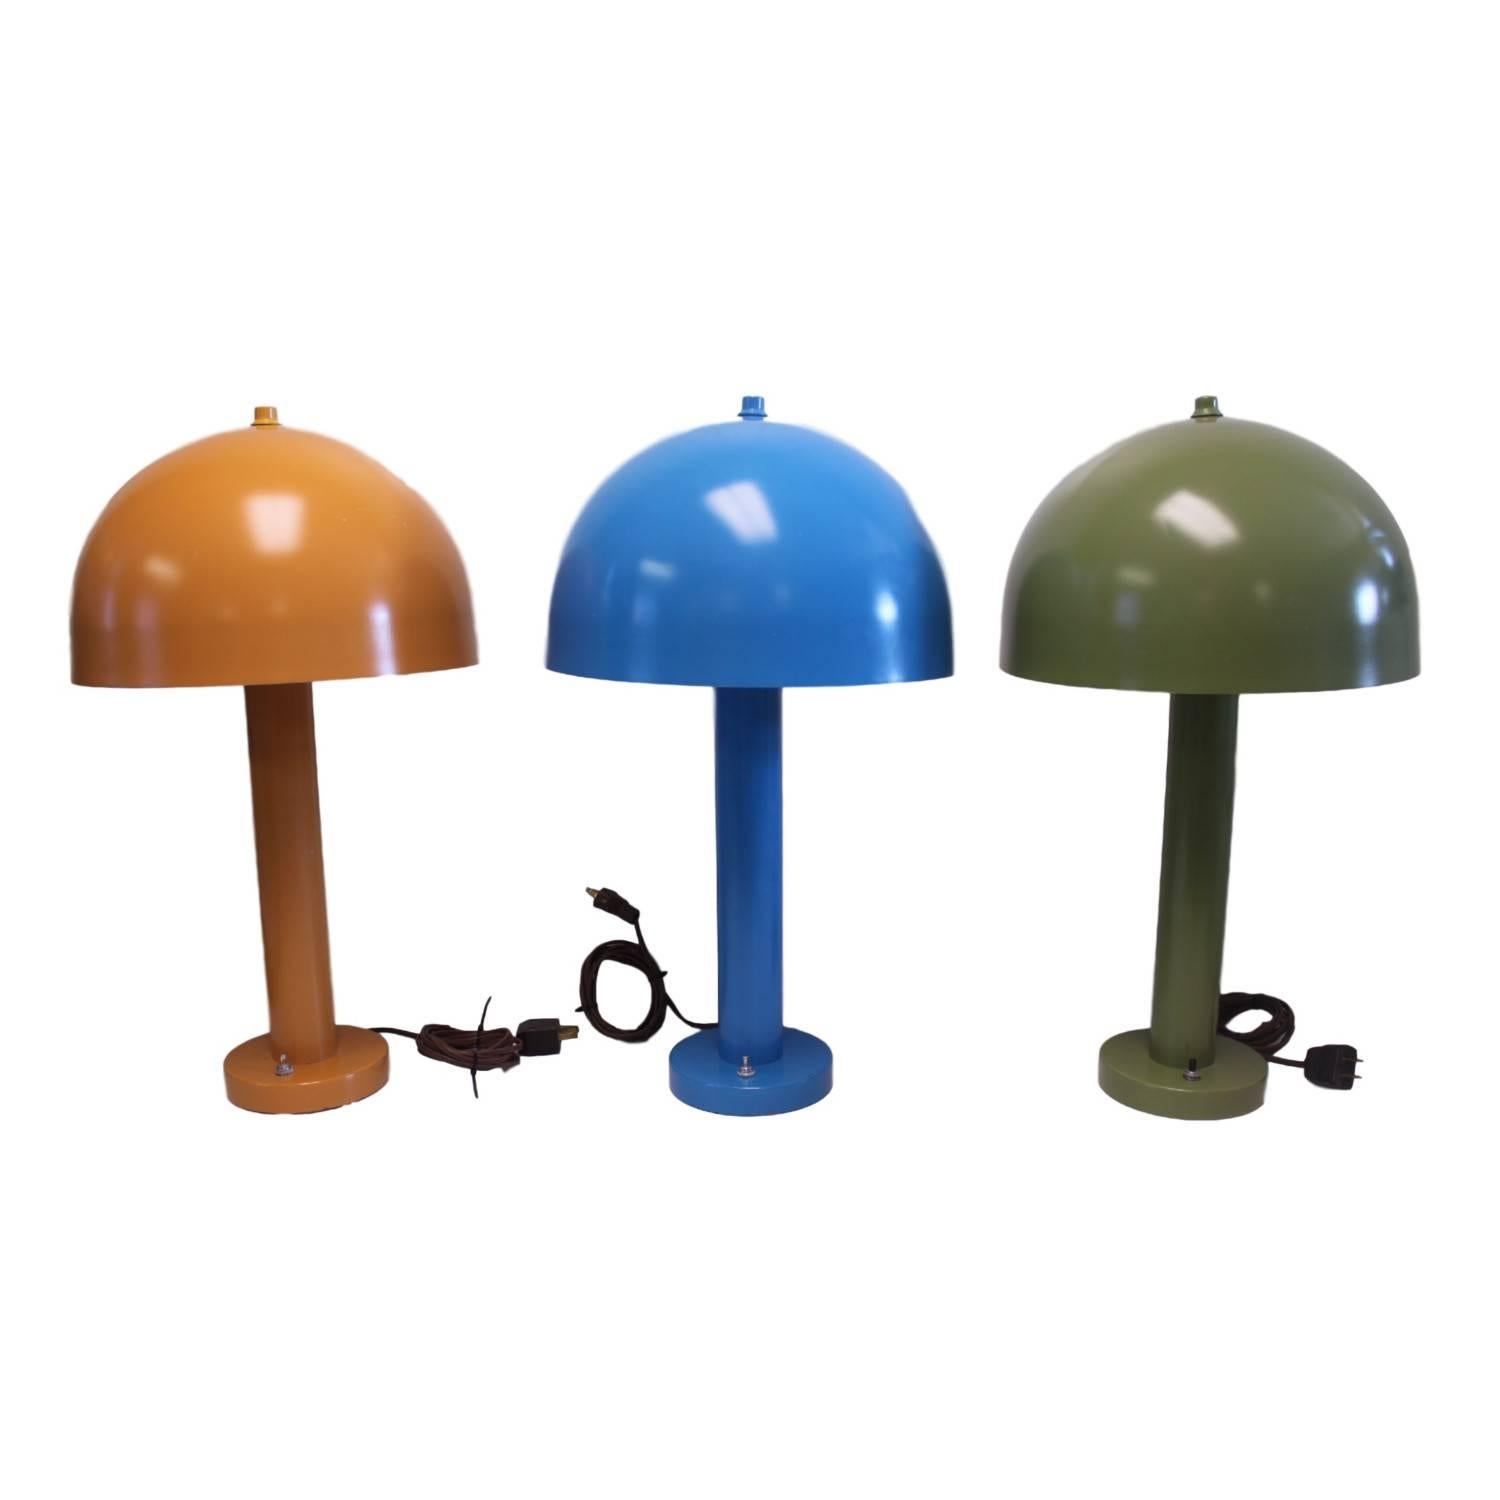 Rare vintage 1960s Nessen mushroom lamps

You are buying your choice of (1) color lamp (as the supply lasts)

Lamps feature:

- Spun aluminum shade
- Cylindrical aluminum body
- Weighted steel base w/ hotel-style switch
- Bright 1960s